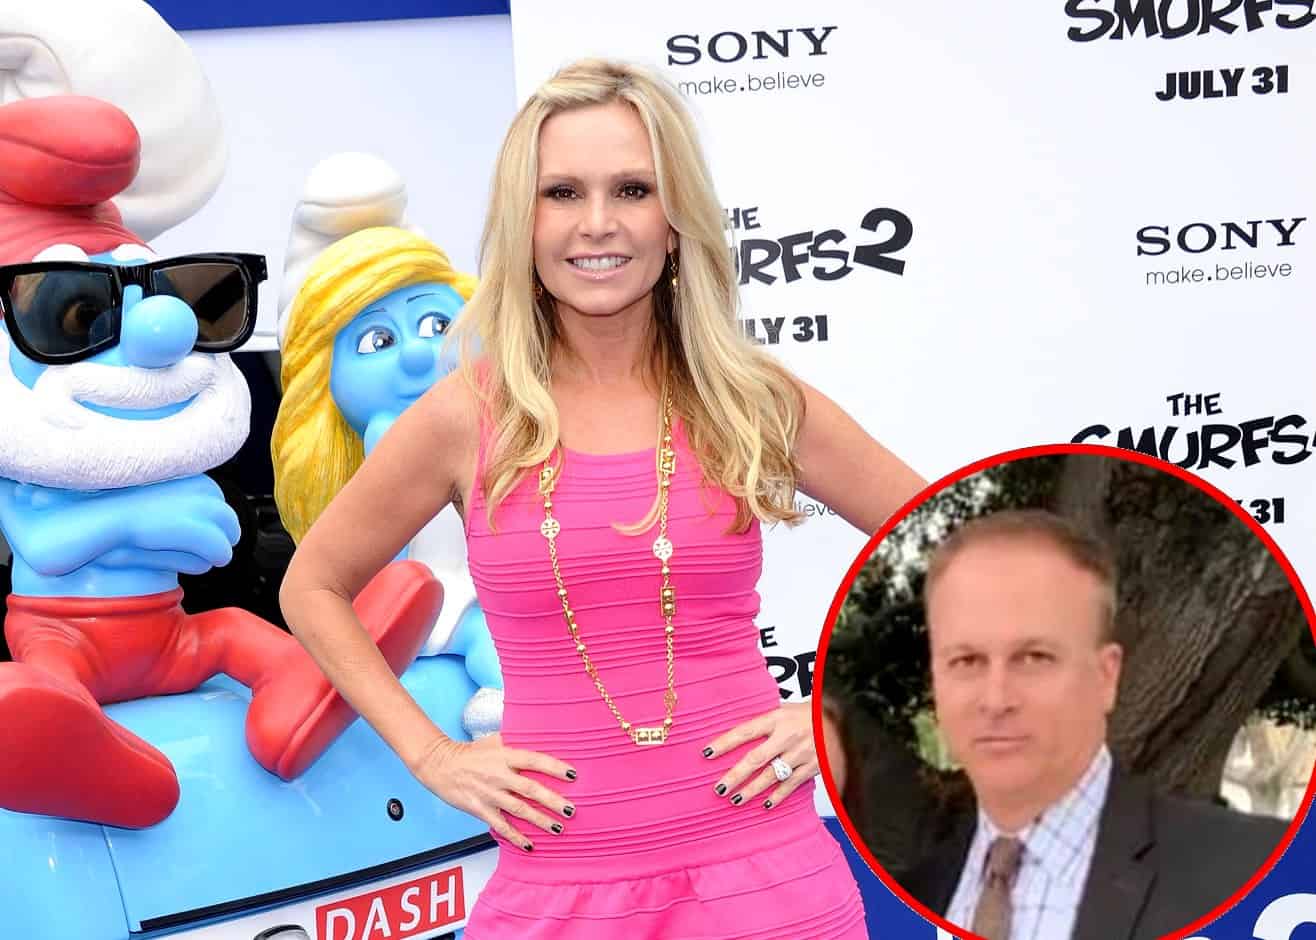 RHOC's Tamra Judge Shares Surprising Update on Relationship With Ex-Husband Simon Barney, Discusses How Divorce Caused Division in Family